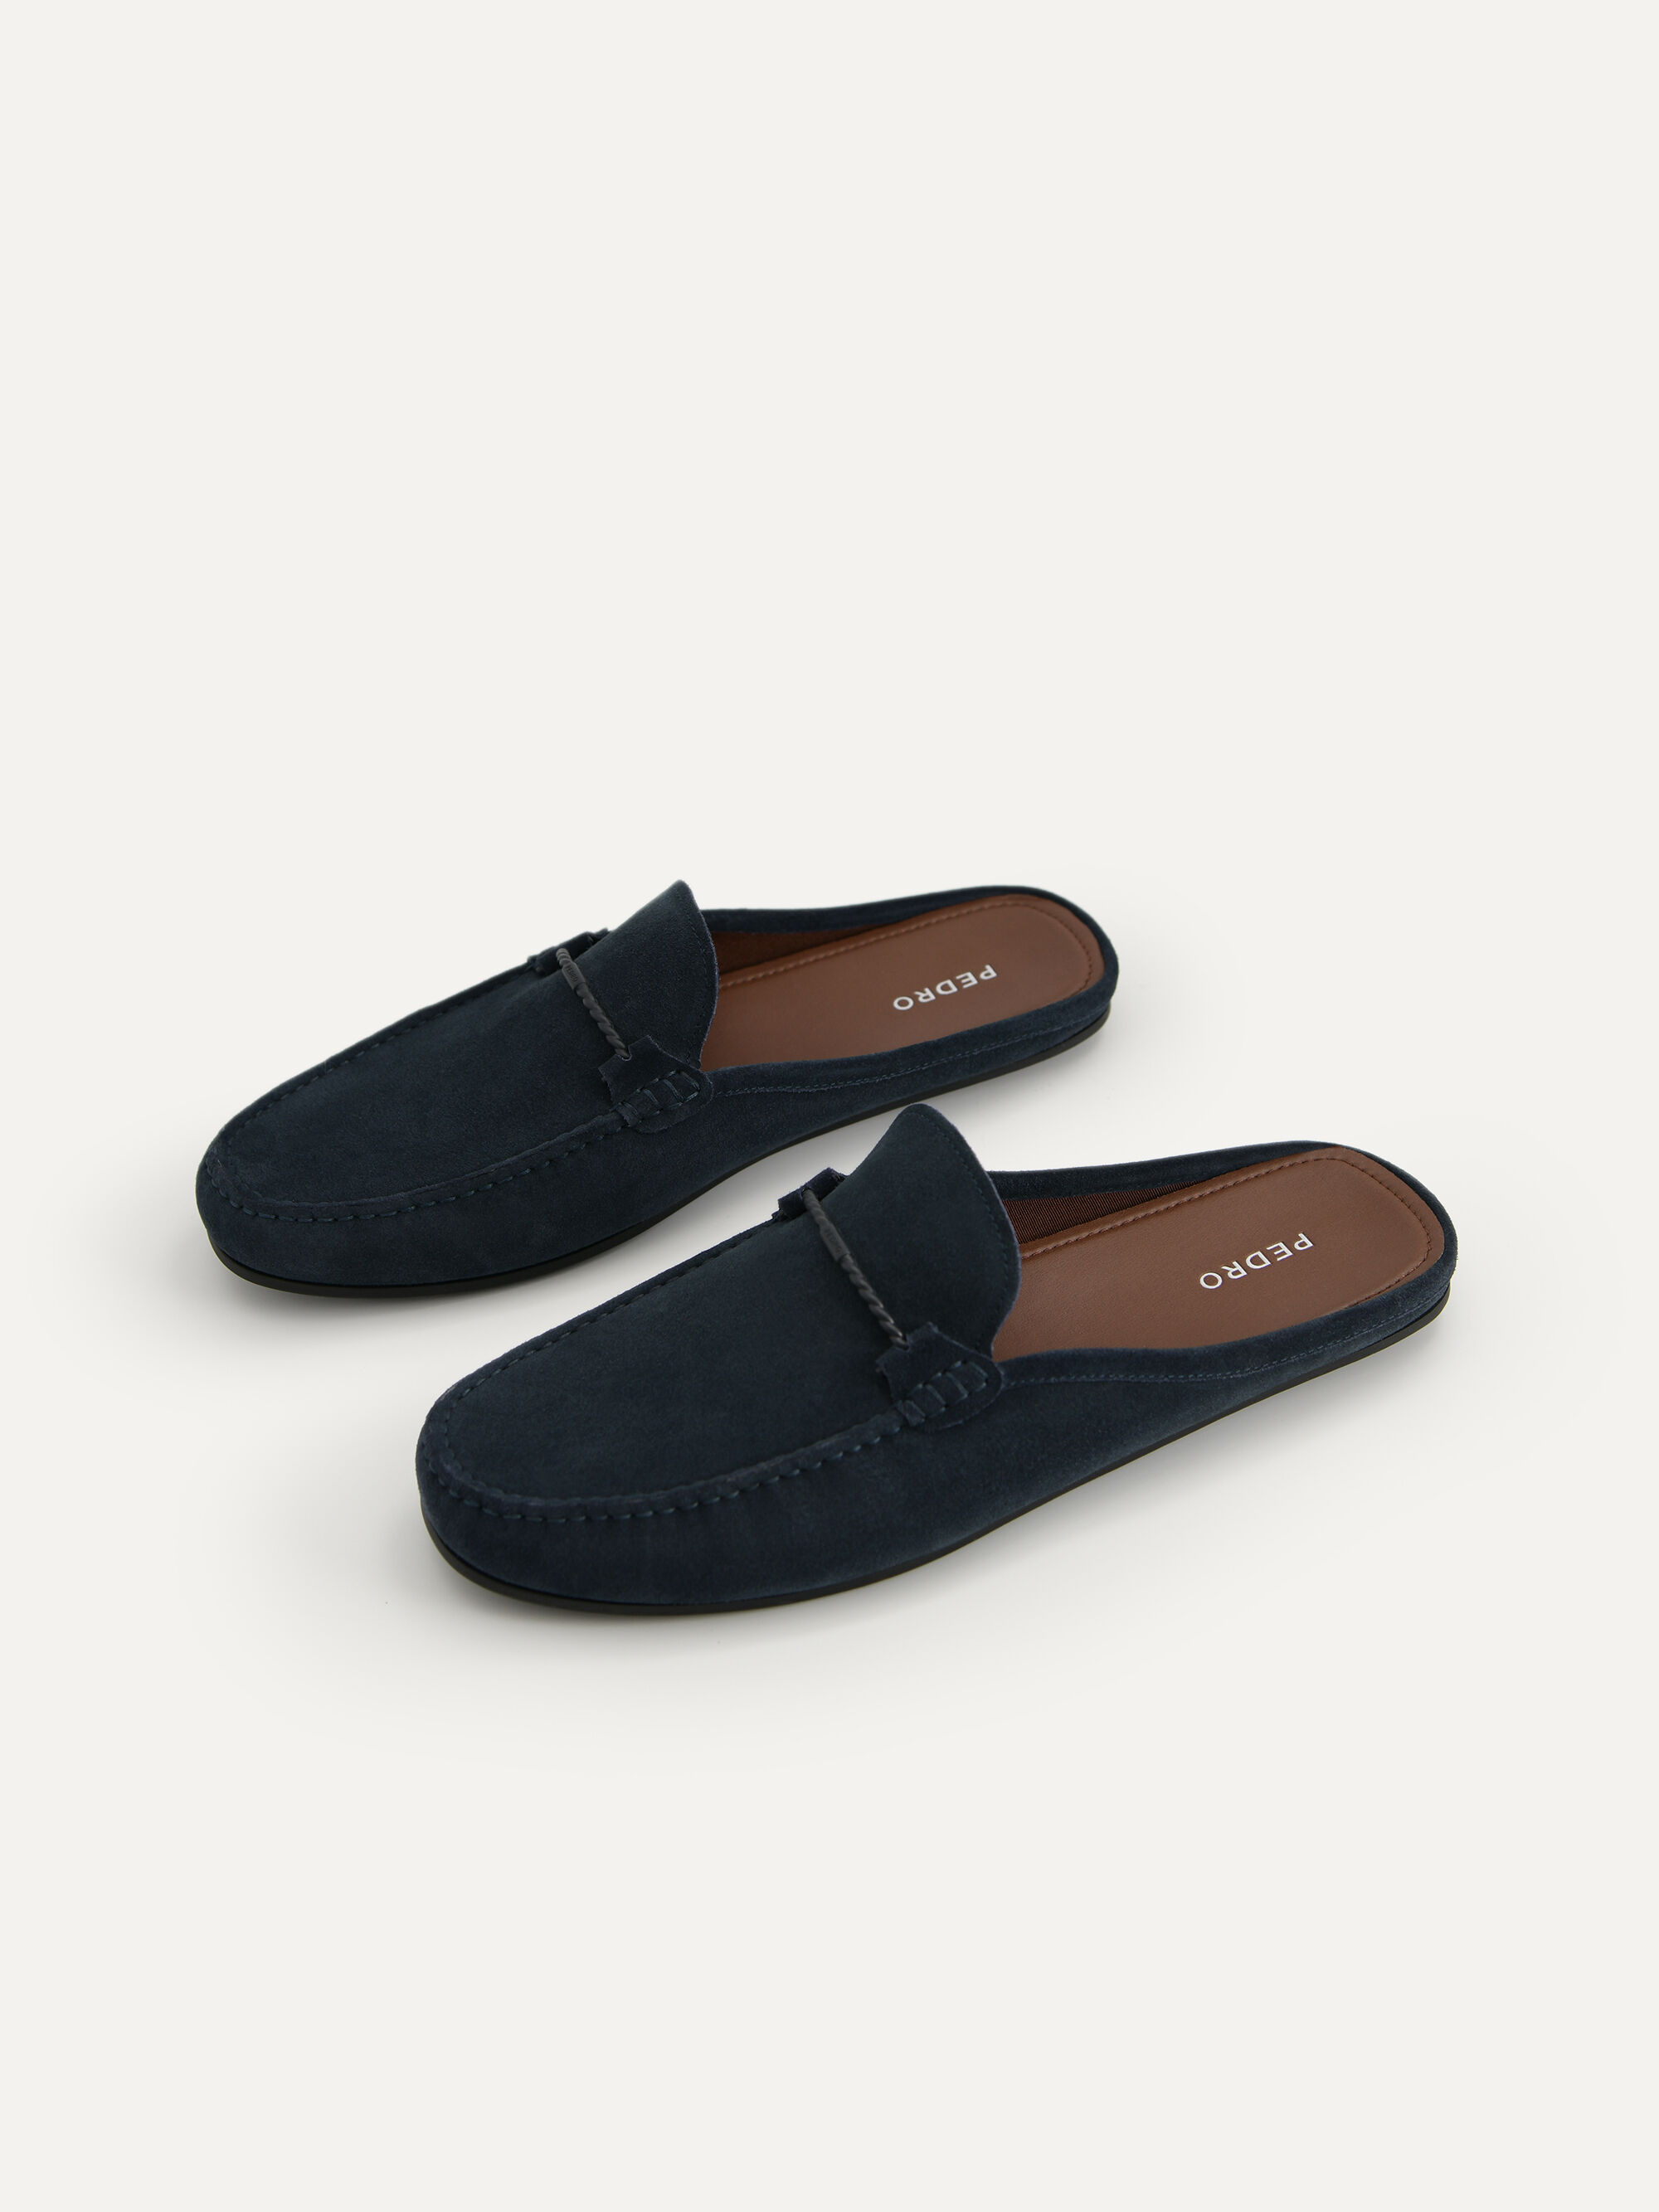 suede slip on loafers